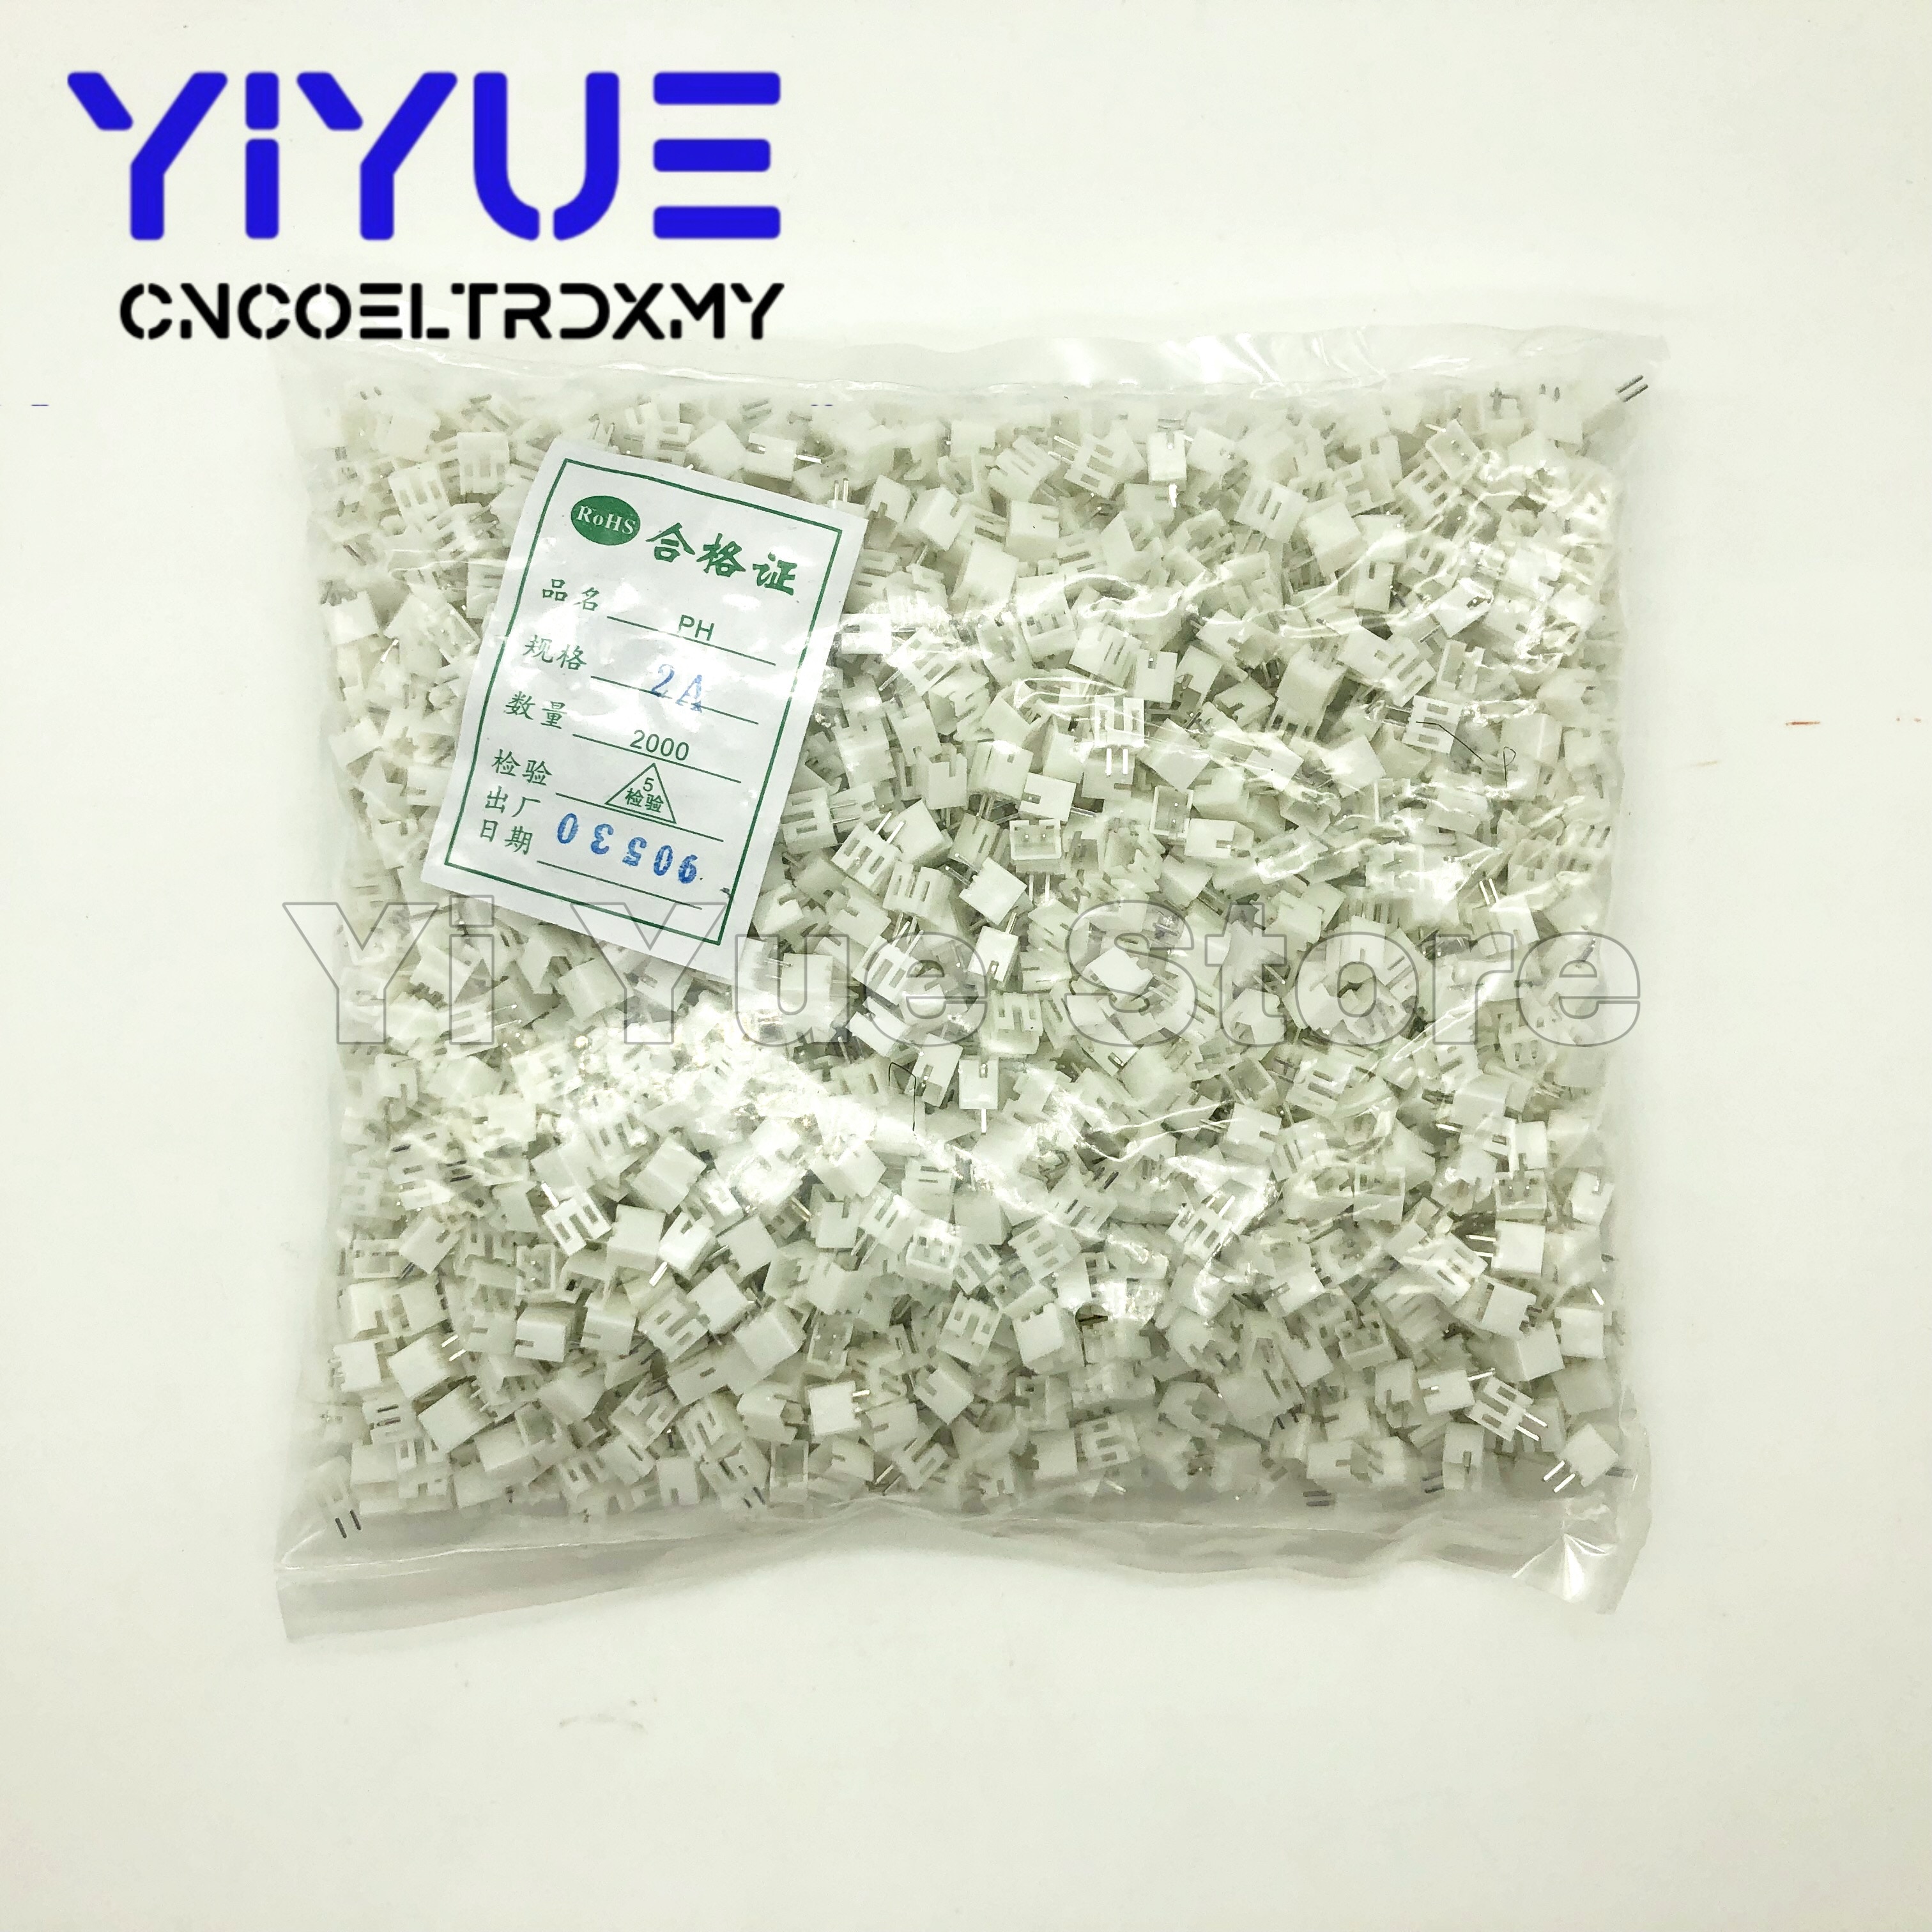 2000pcs PH2.0 2 p/3 p/4pin 2.0mm Toonhoogte Pin Header JST Connector Draad Connectors Adapter PH 2.0mm Afstand Connector